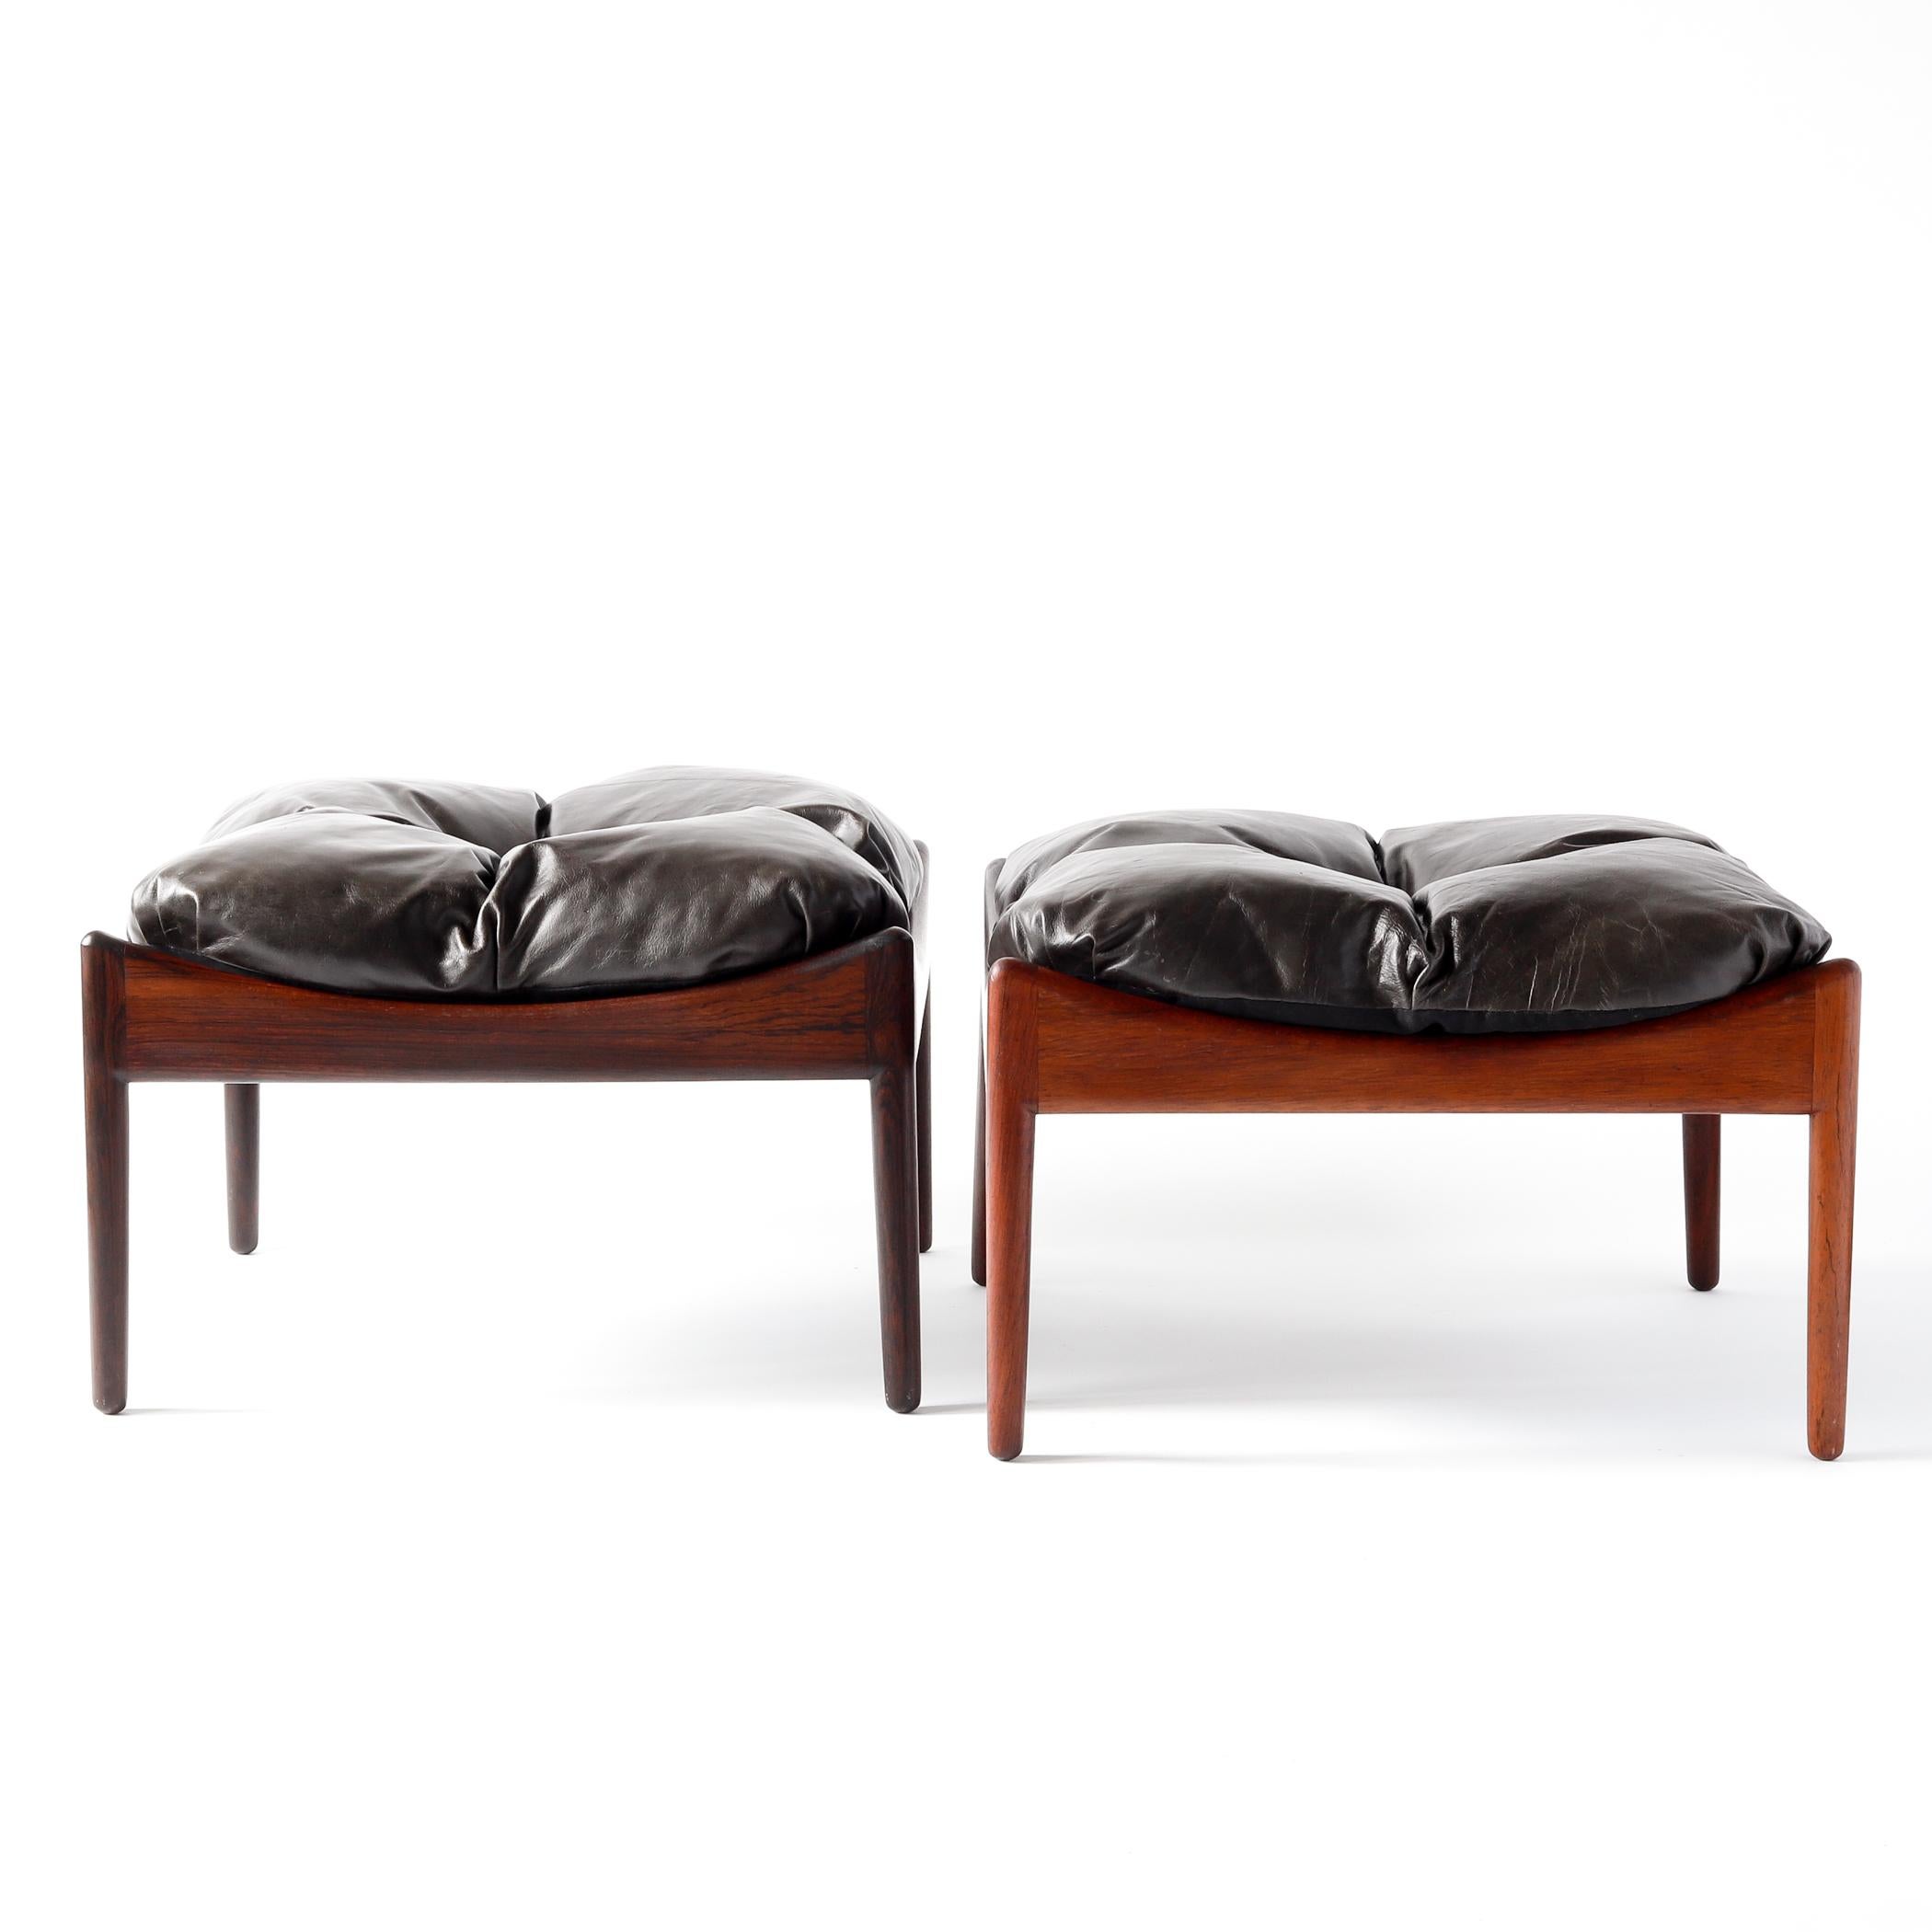 Pair of Danish Modern rosewood ottomans or stools with leather cushions designed by Kristian Vedel for Soren Willadsen of Denmark. These ottomans were part of Vedel's Modus line from the 1960s, which included a lounge chair and side table that used